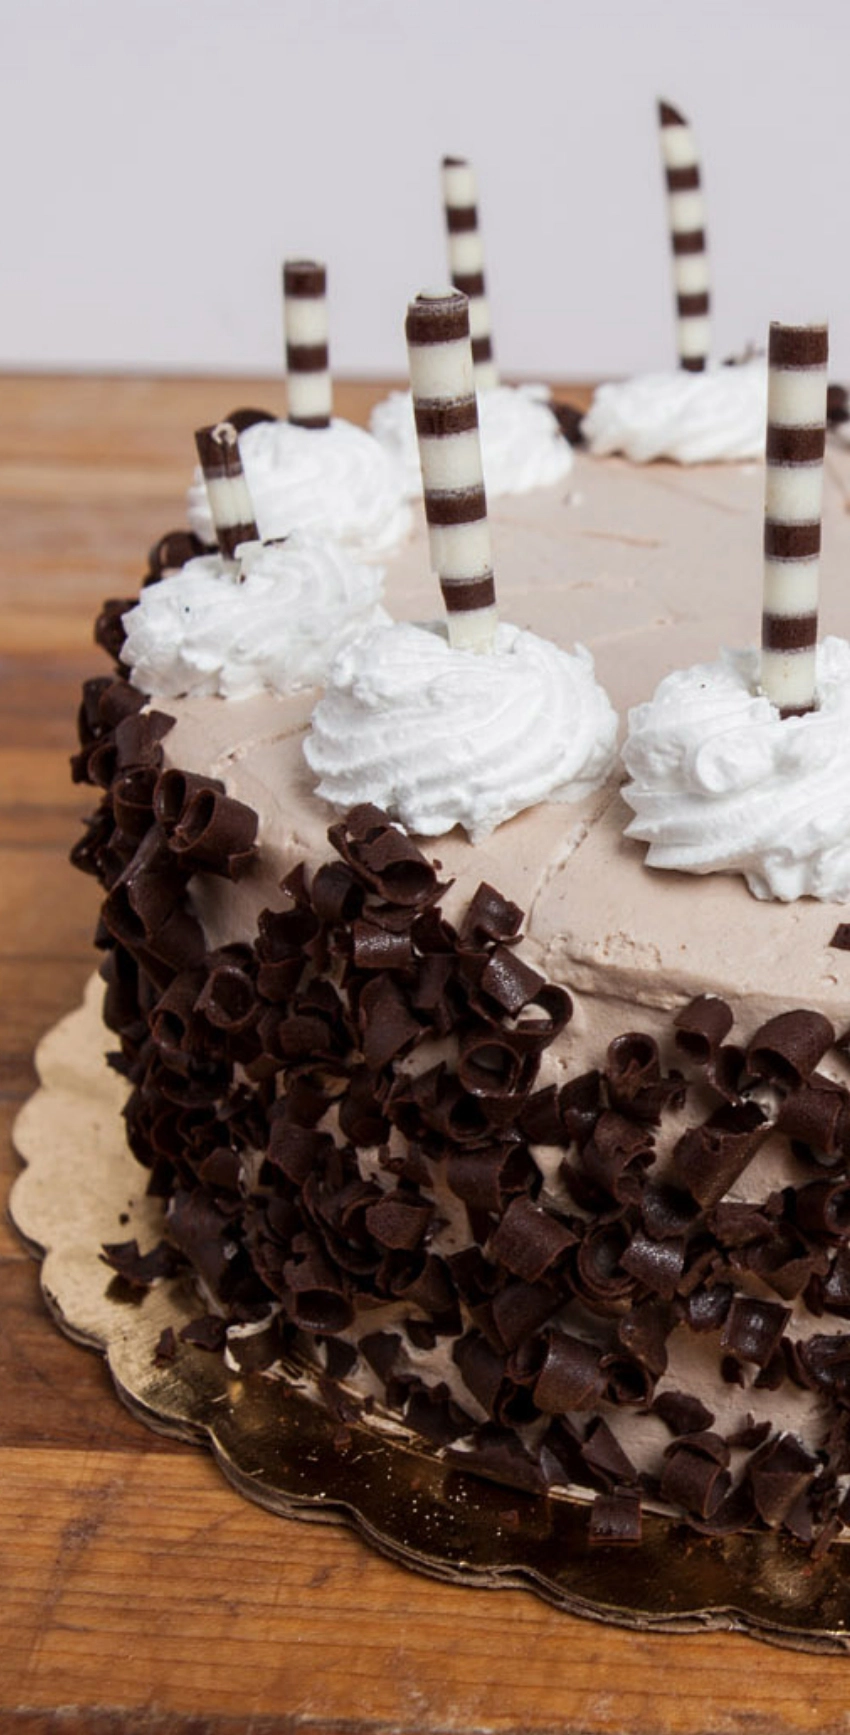 A chocolate cake topped with five whipped cream swirls and striped stick decorations, garnished with chocolate shavings around the sides, placed on a wooden surface.